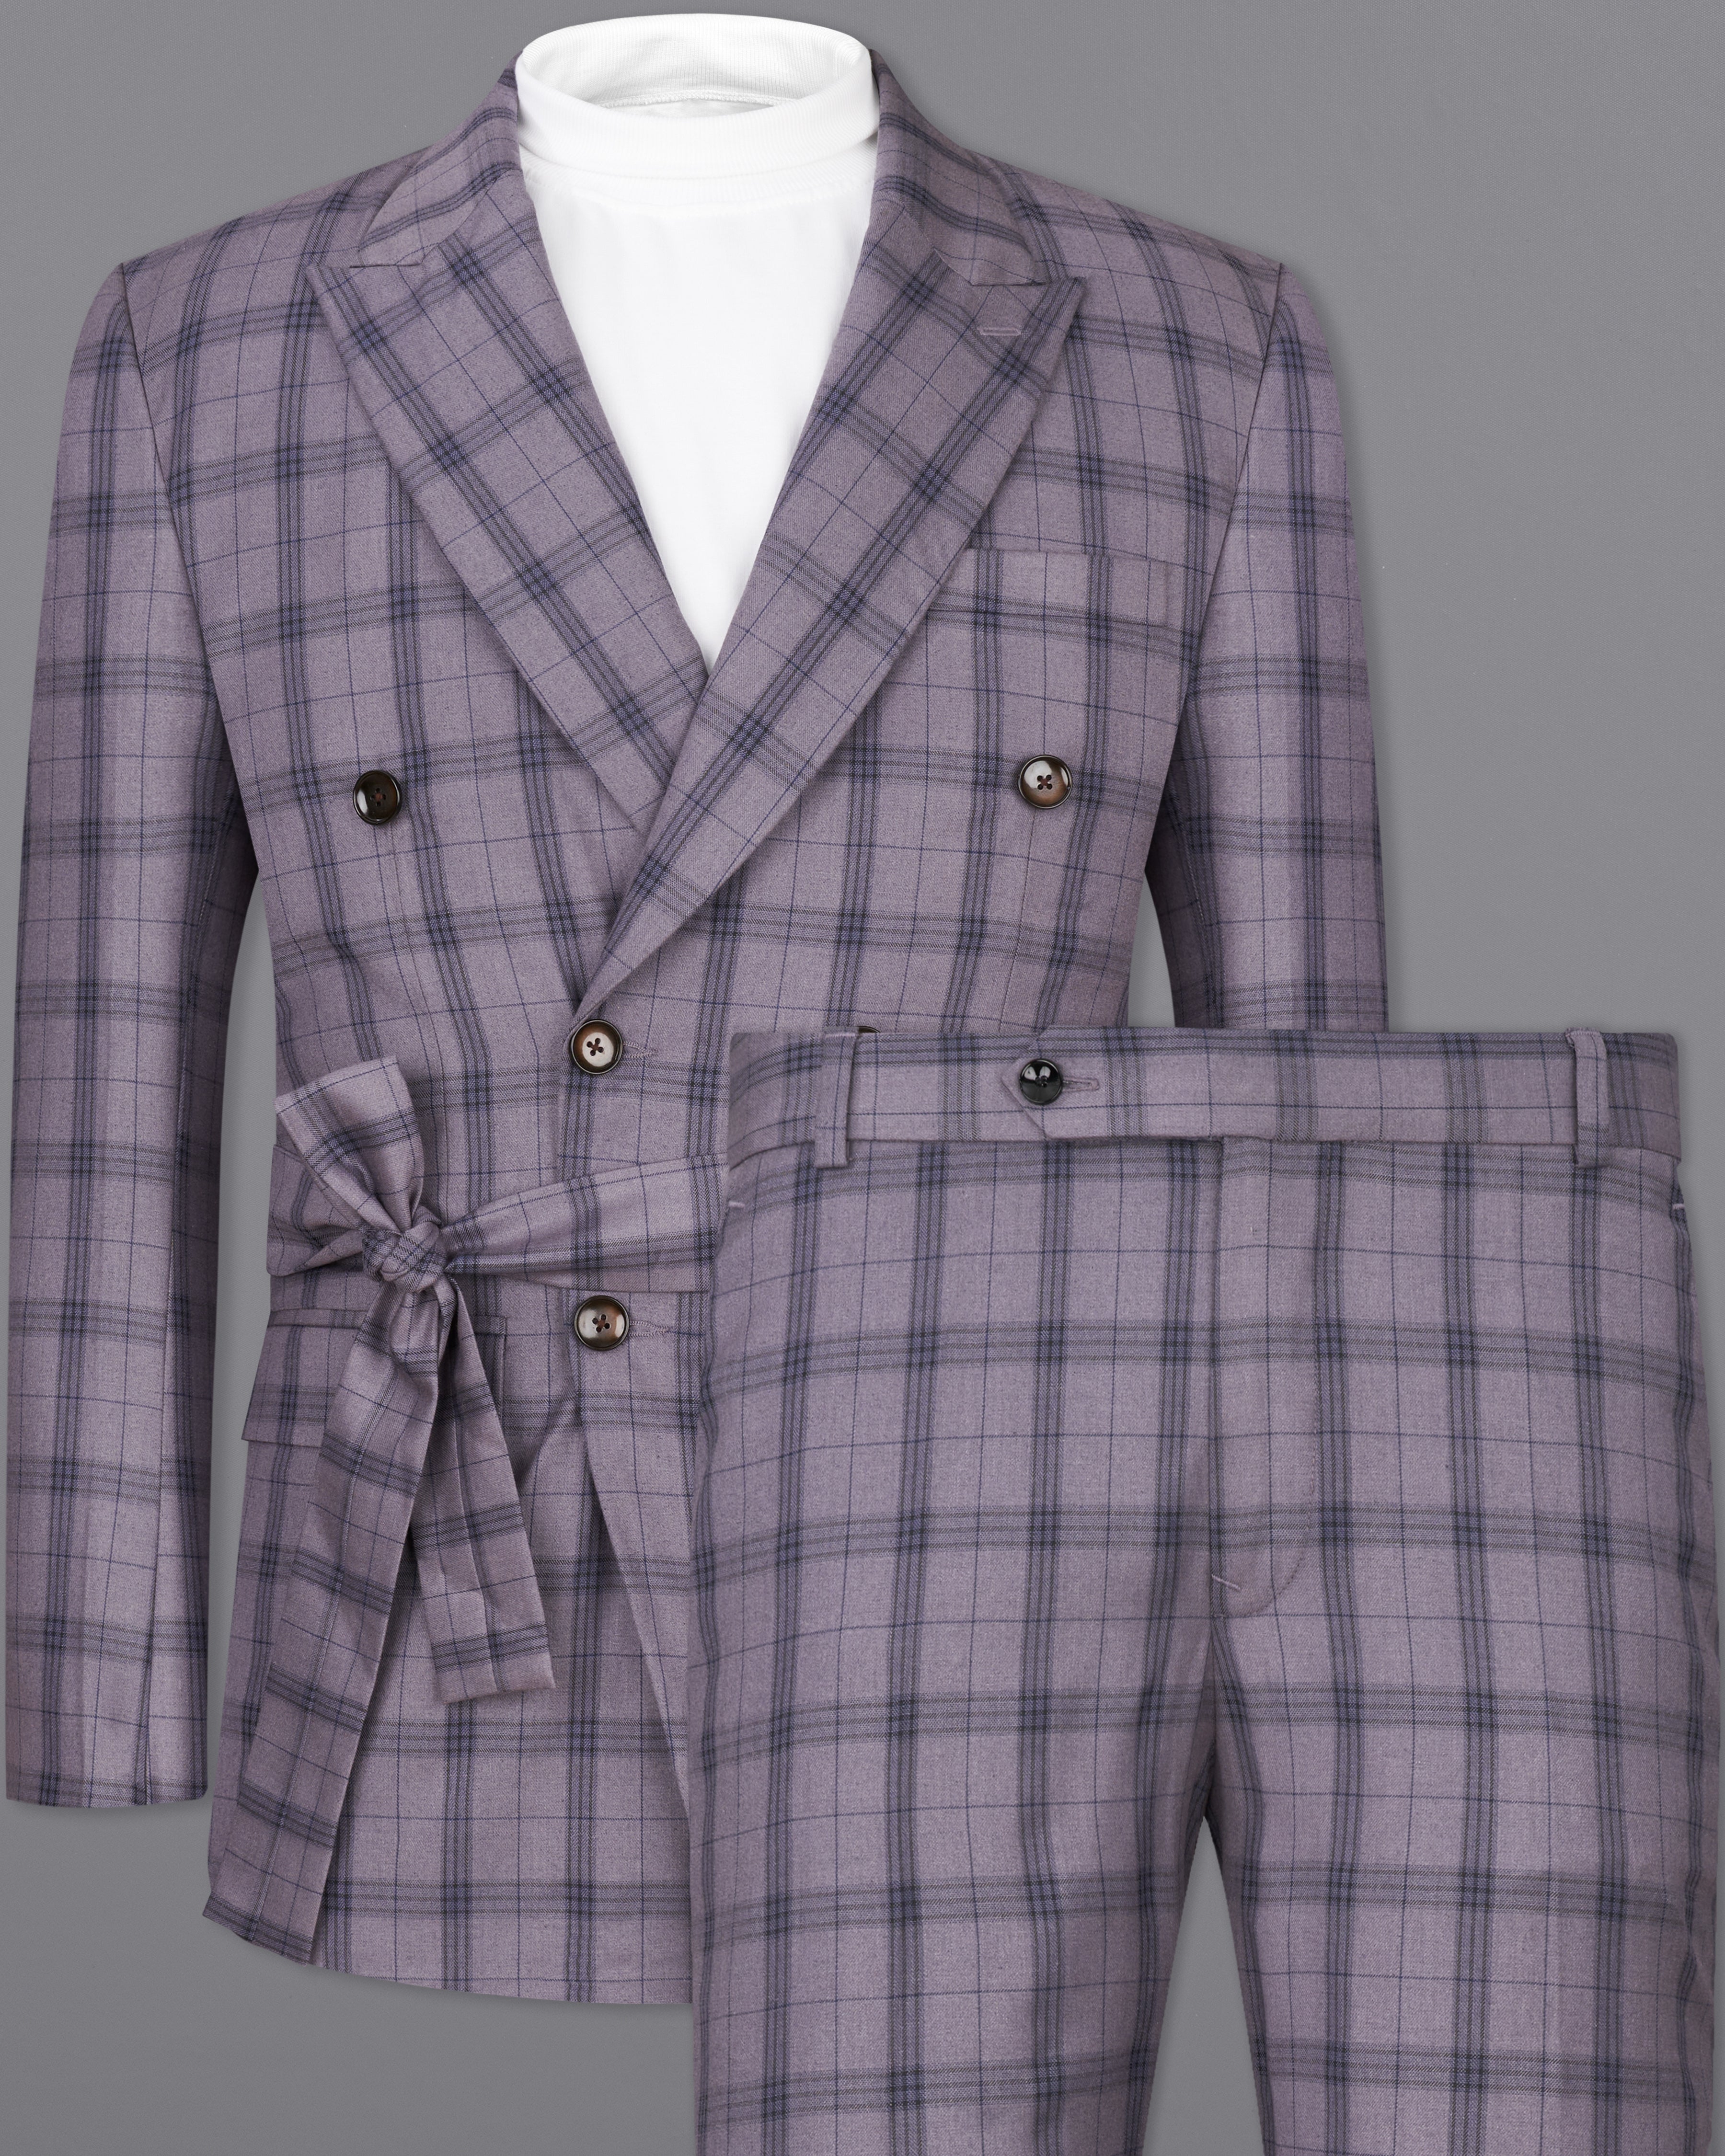 Gunsmoke Purple with Brown Plaid Double Breasted Designer Suit with Belt Closure ST2371-DB-D8-36, ST2371-DB-D8-38, ST2371-DB-D8-40, ST2371-DB-D8-42, ST2371-DB-D8-44, ST2371-DB-D8-46, ST2371-DB-D8-48, ST2371-DB-D8-50, ST2371-DB-D8-52, ST2371-DB-D8-54, ST2371-DB-D8-56, ST2371-DB-D8-58, ST2371-DB-D8-60